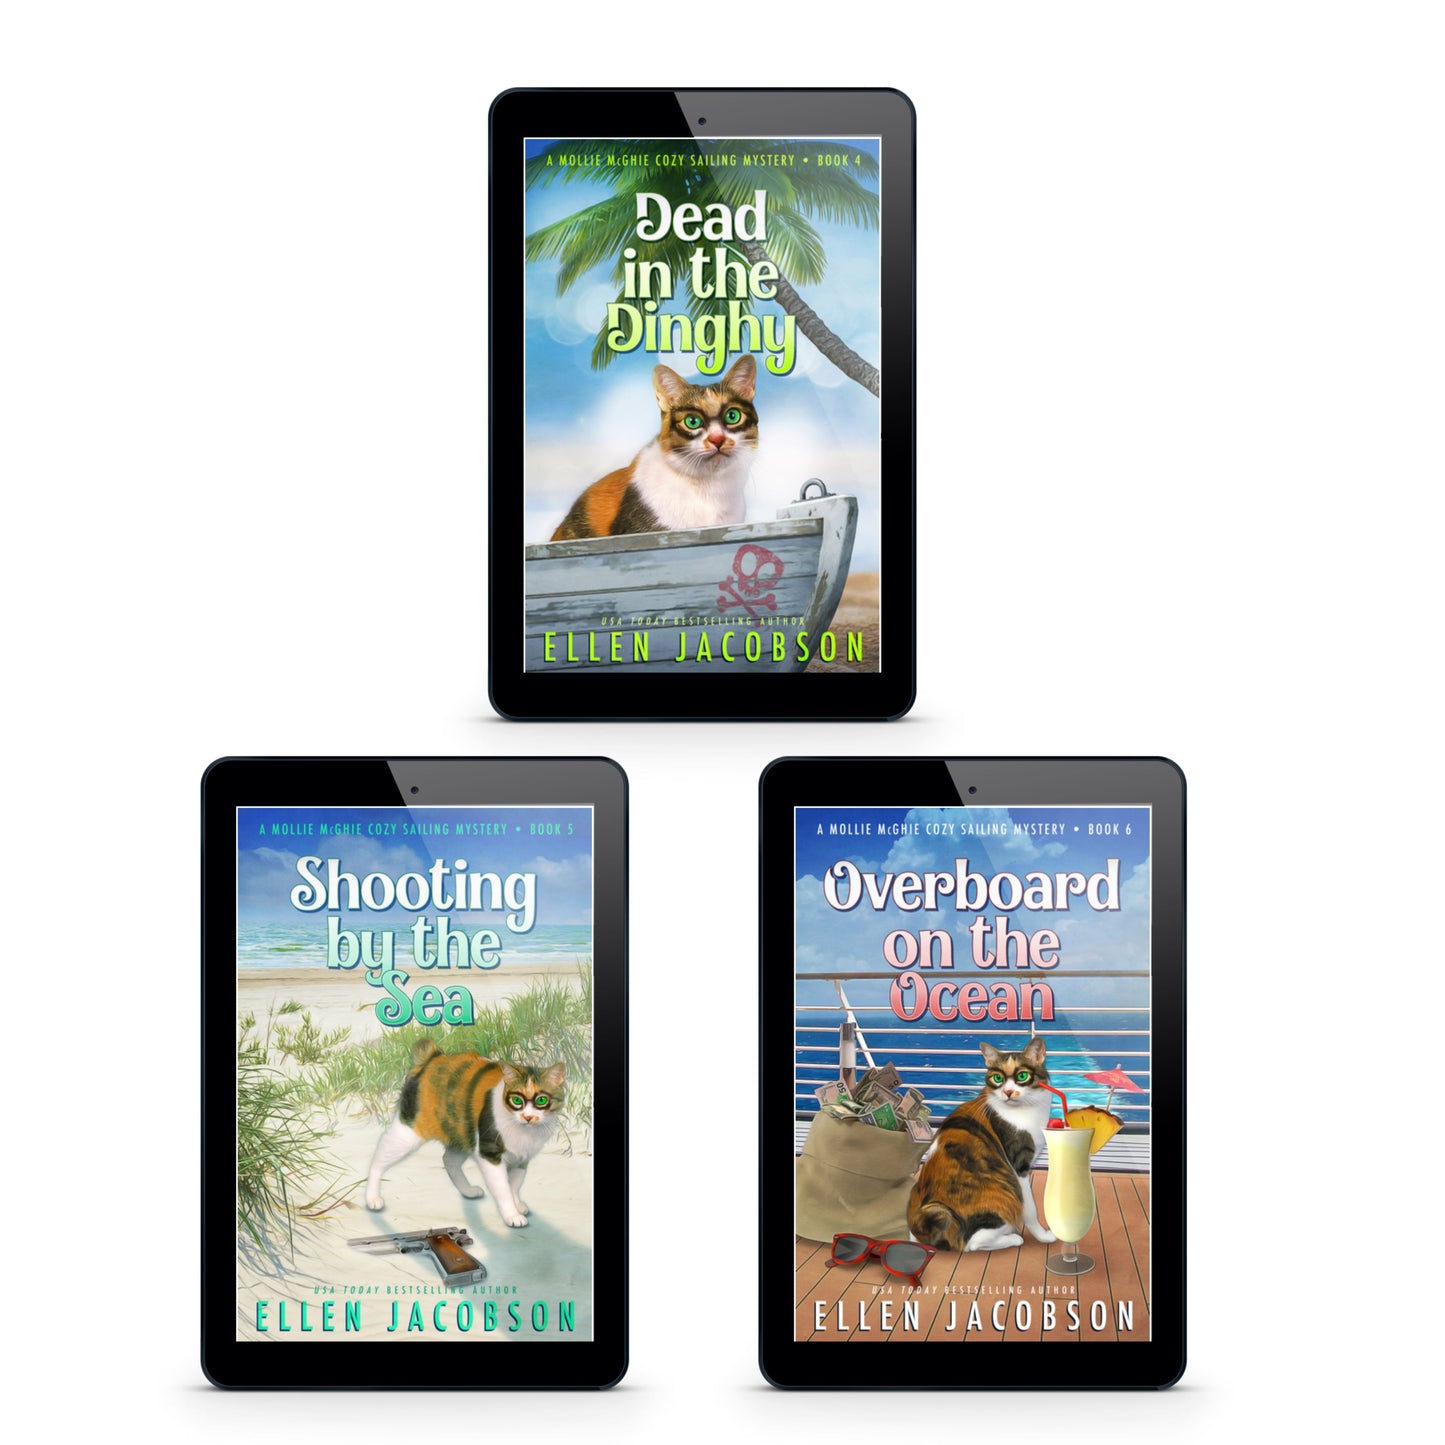 Mollie McGhie Ebook Bundle (Books 4-6) including Dead in the Dinghy, Shooting by the Sea, and Overobard on the Ocean